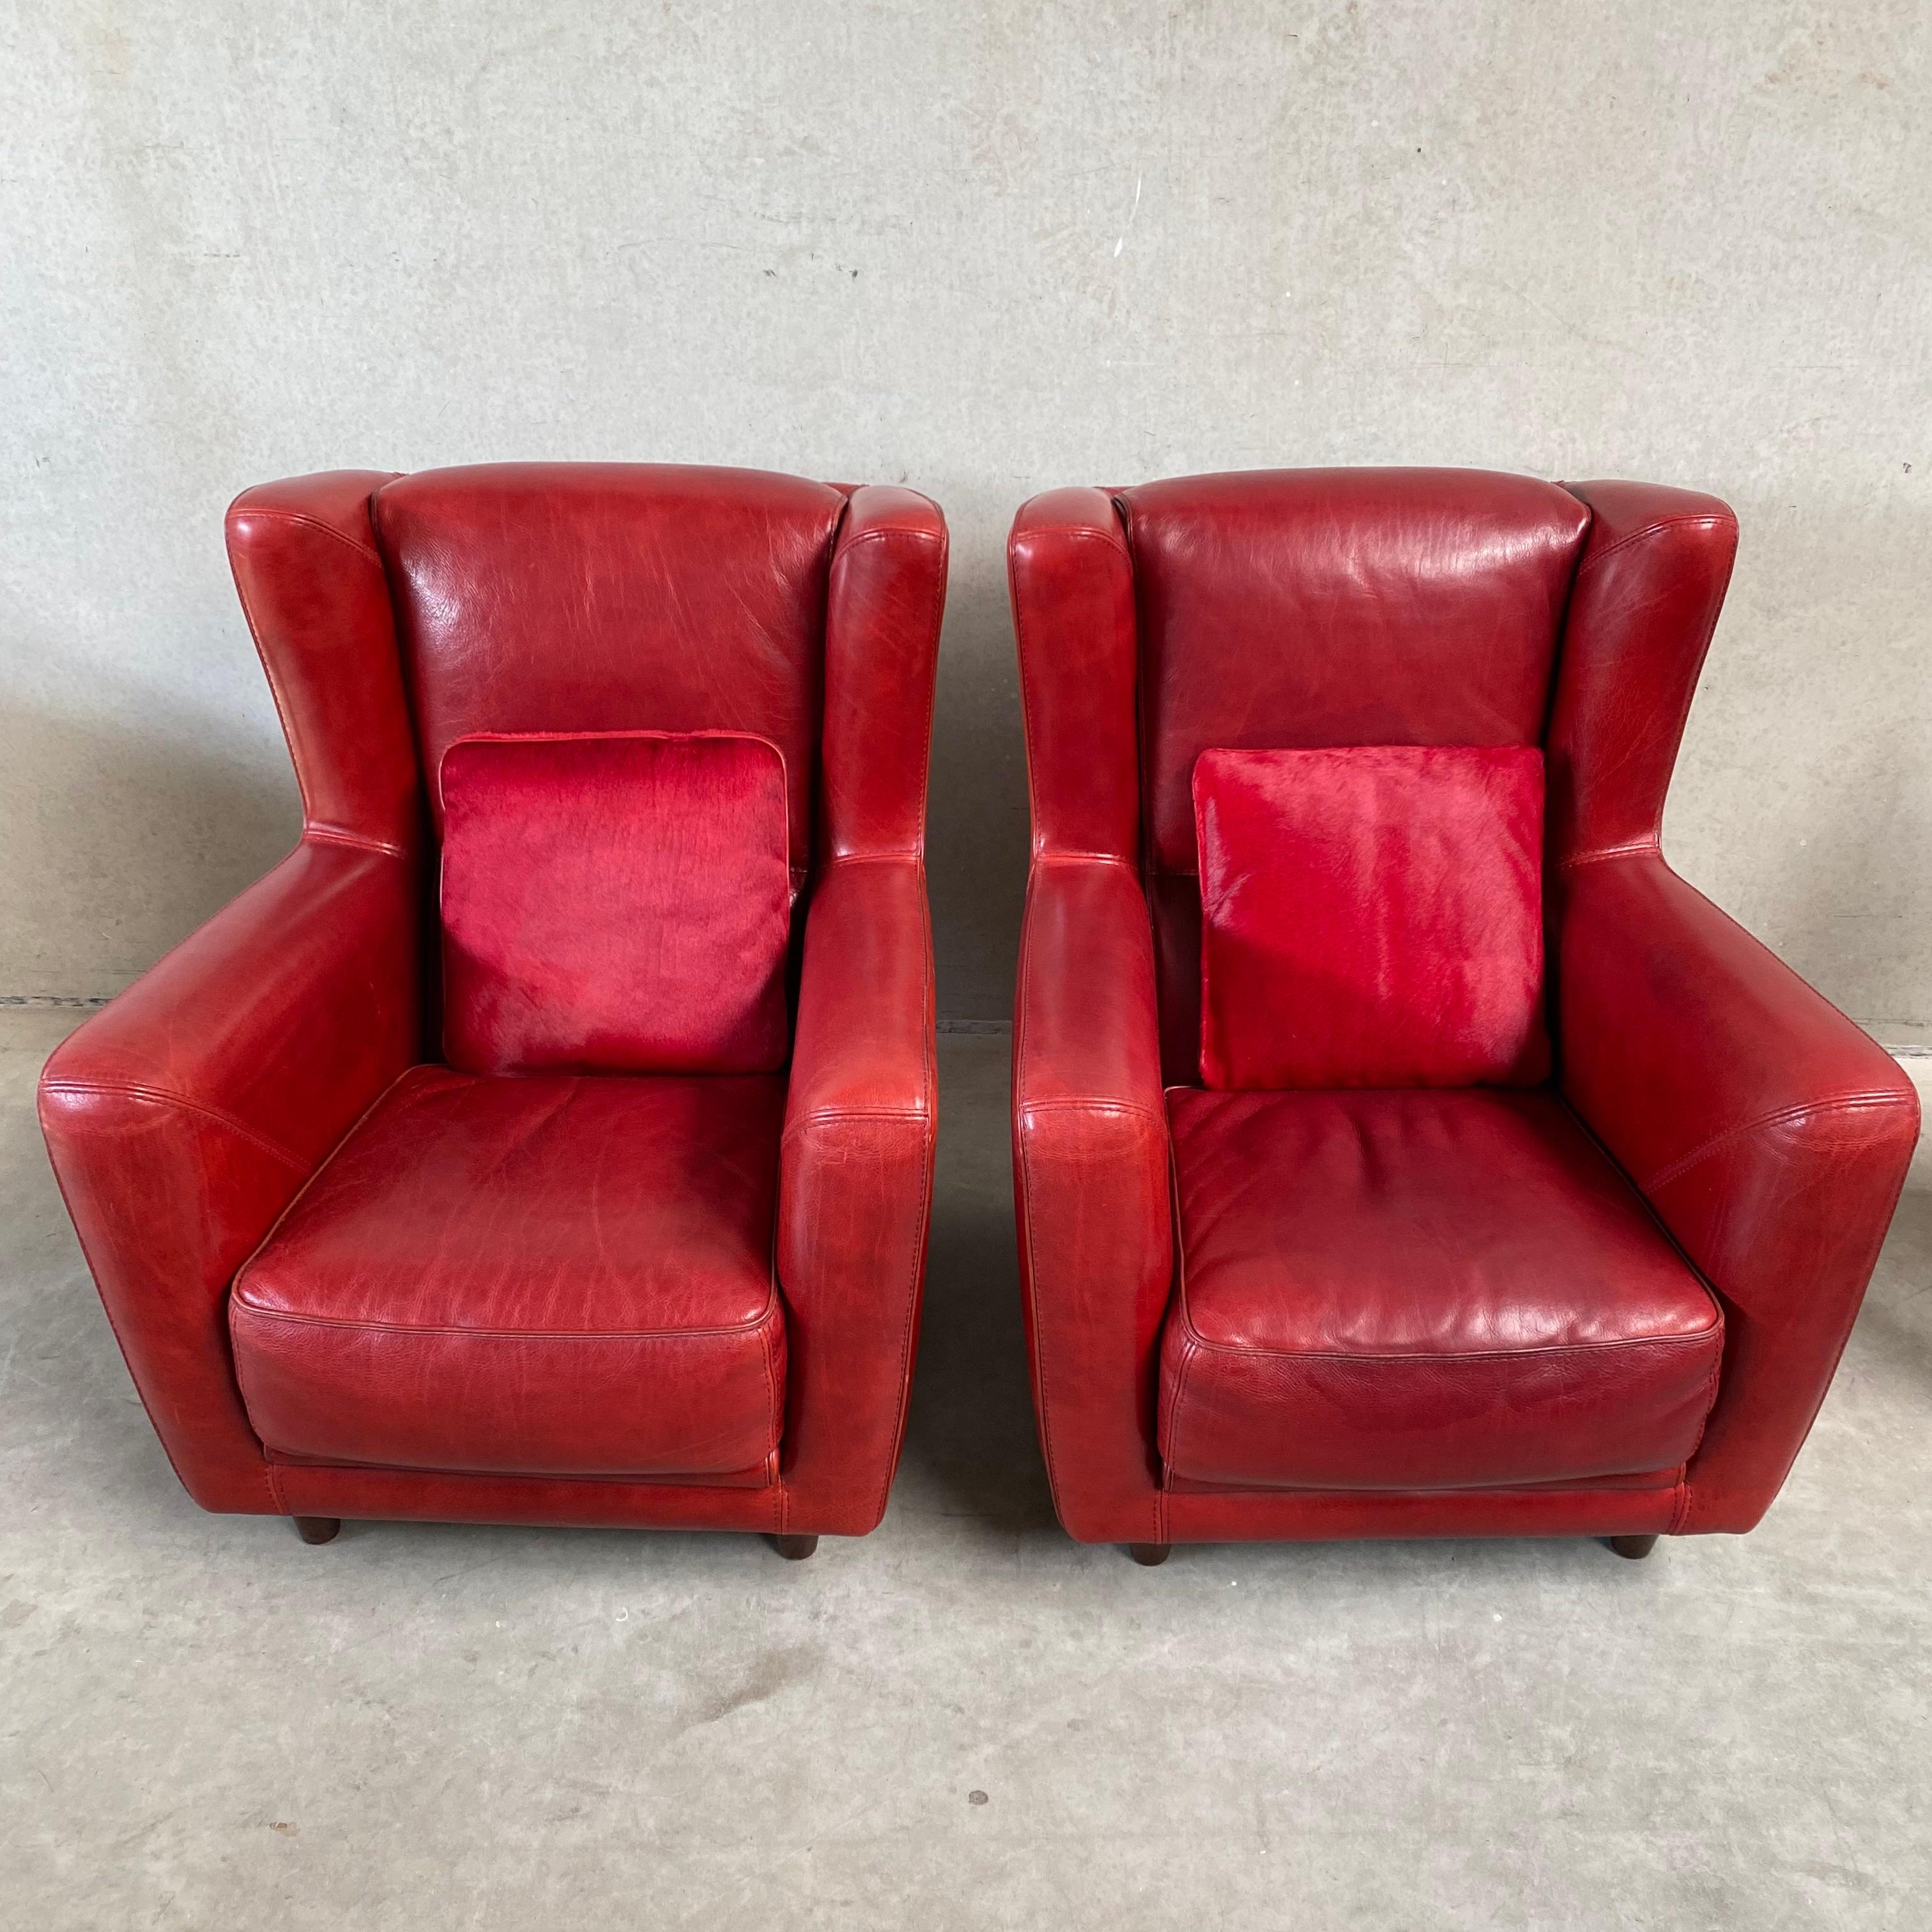 Pair of Ox-Blood Red Leather Lounge Chairs Begére by Baxter Italy 90s For Sale 9